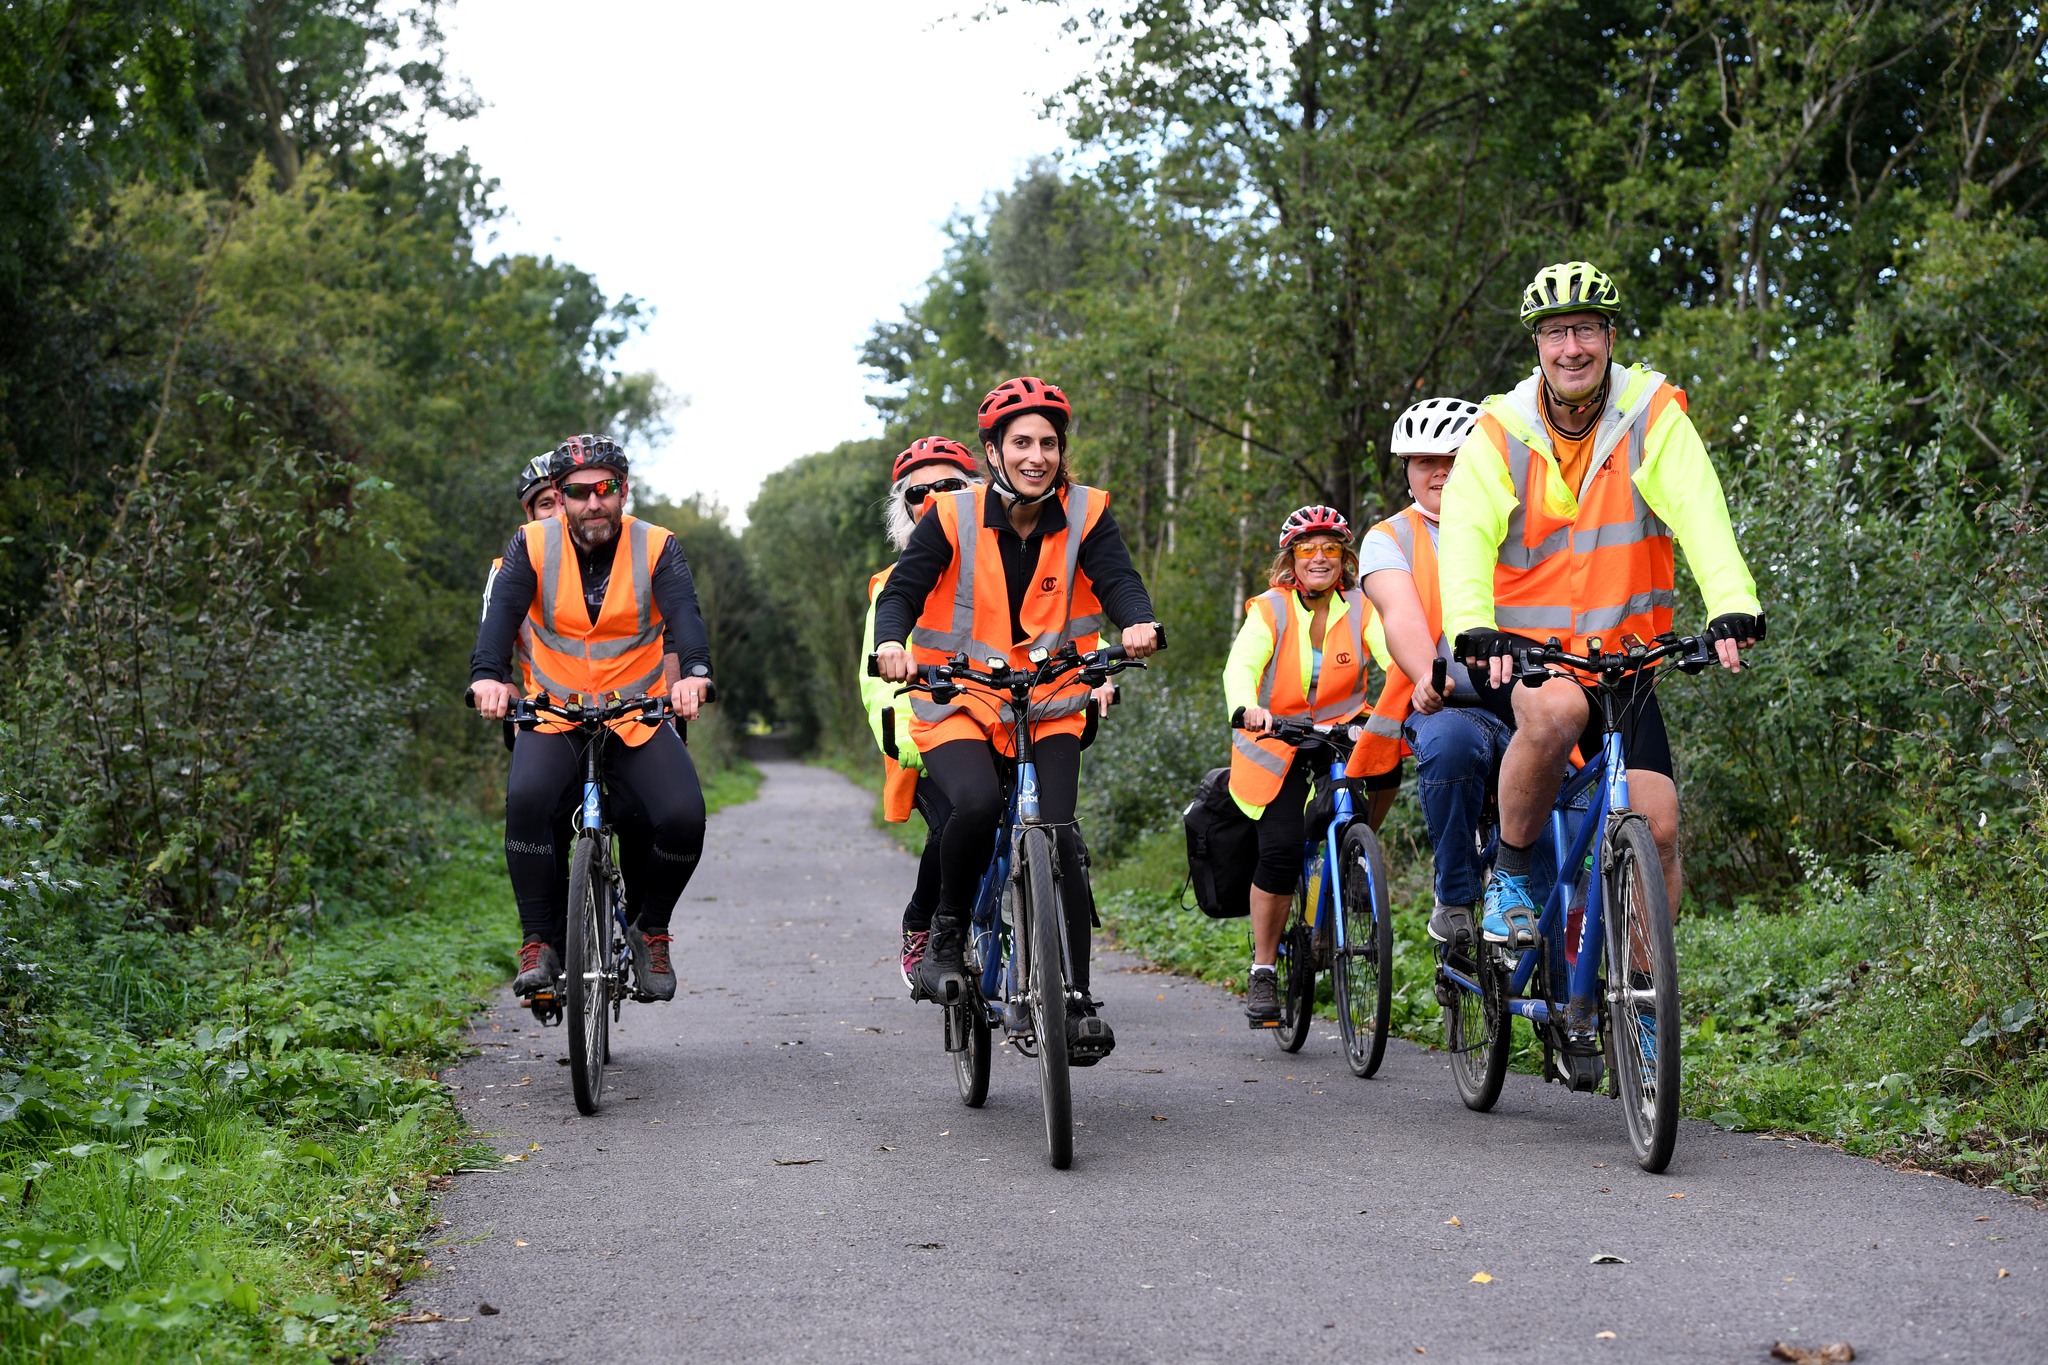 A group of riders on tandem bikes on a cycle path